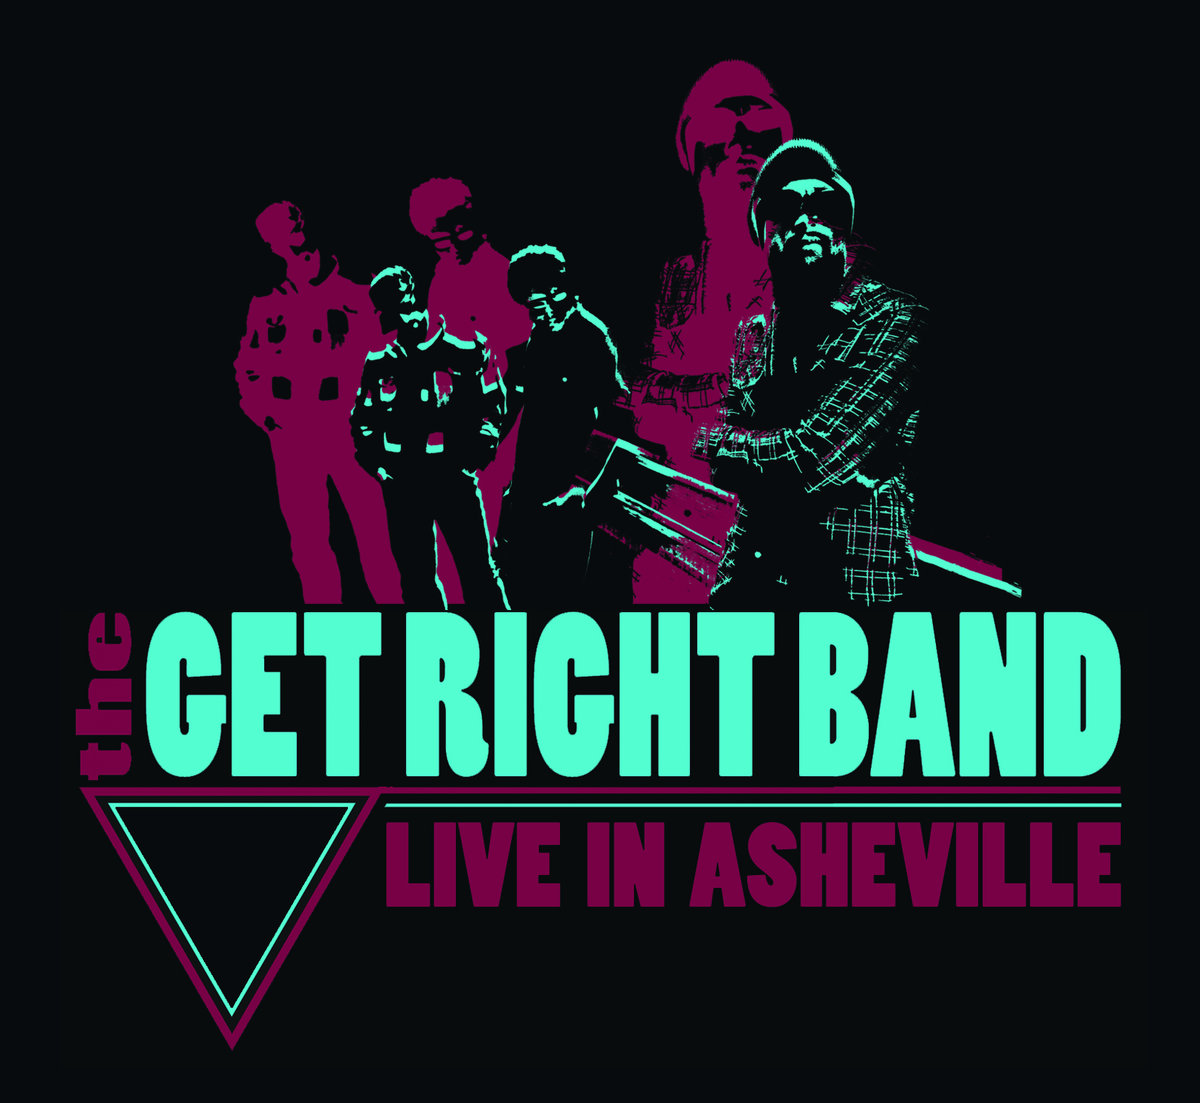 The Get Right Band: Live in Asheville